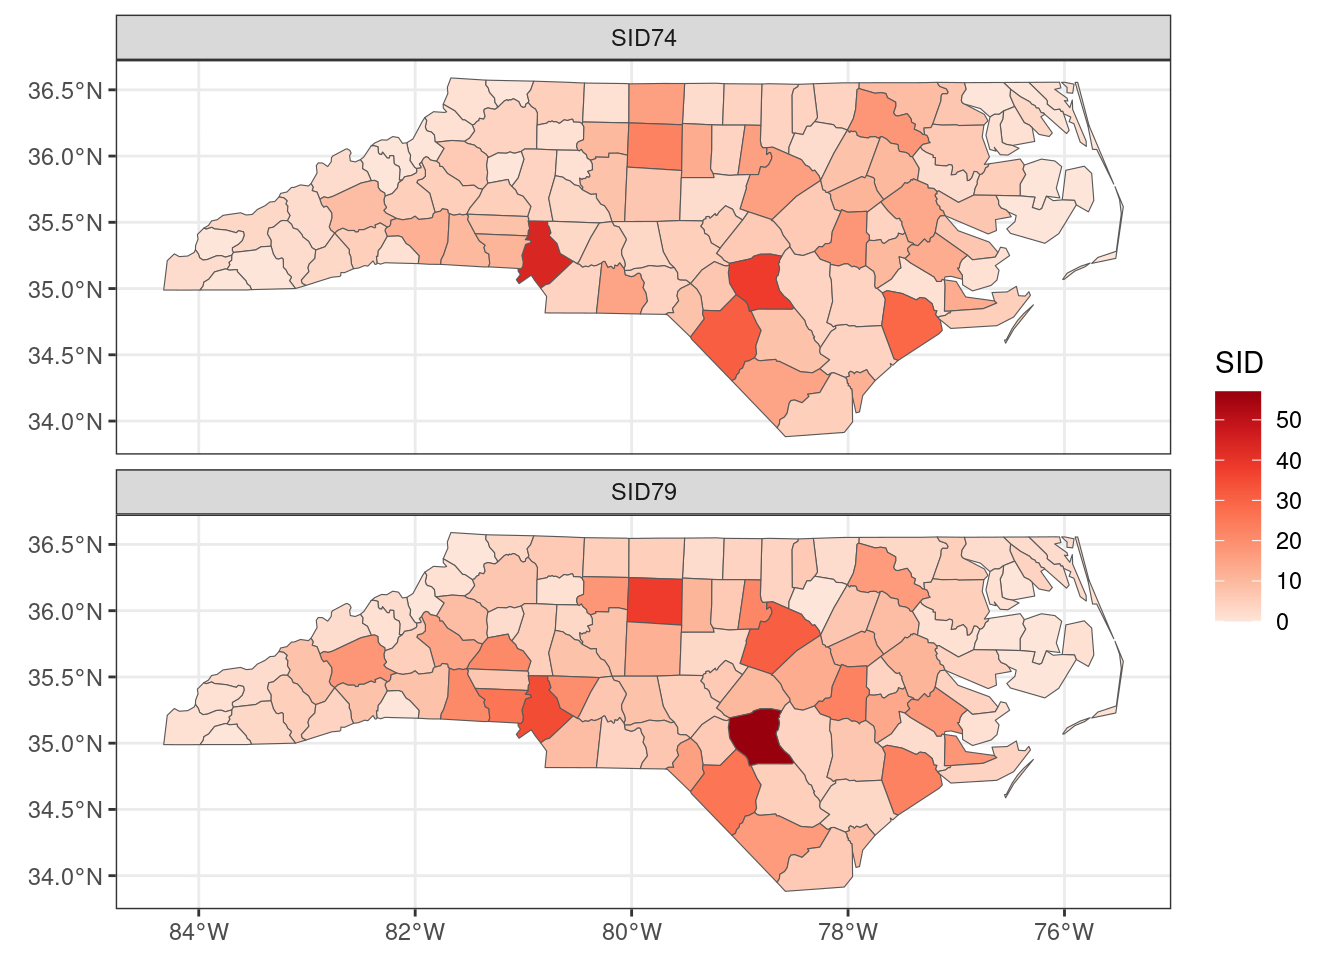 A map with facets for different attributes, using the `ggplot2` package